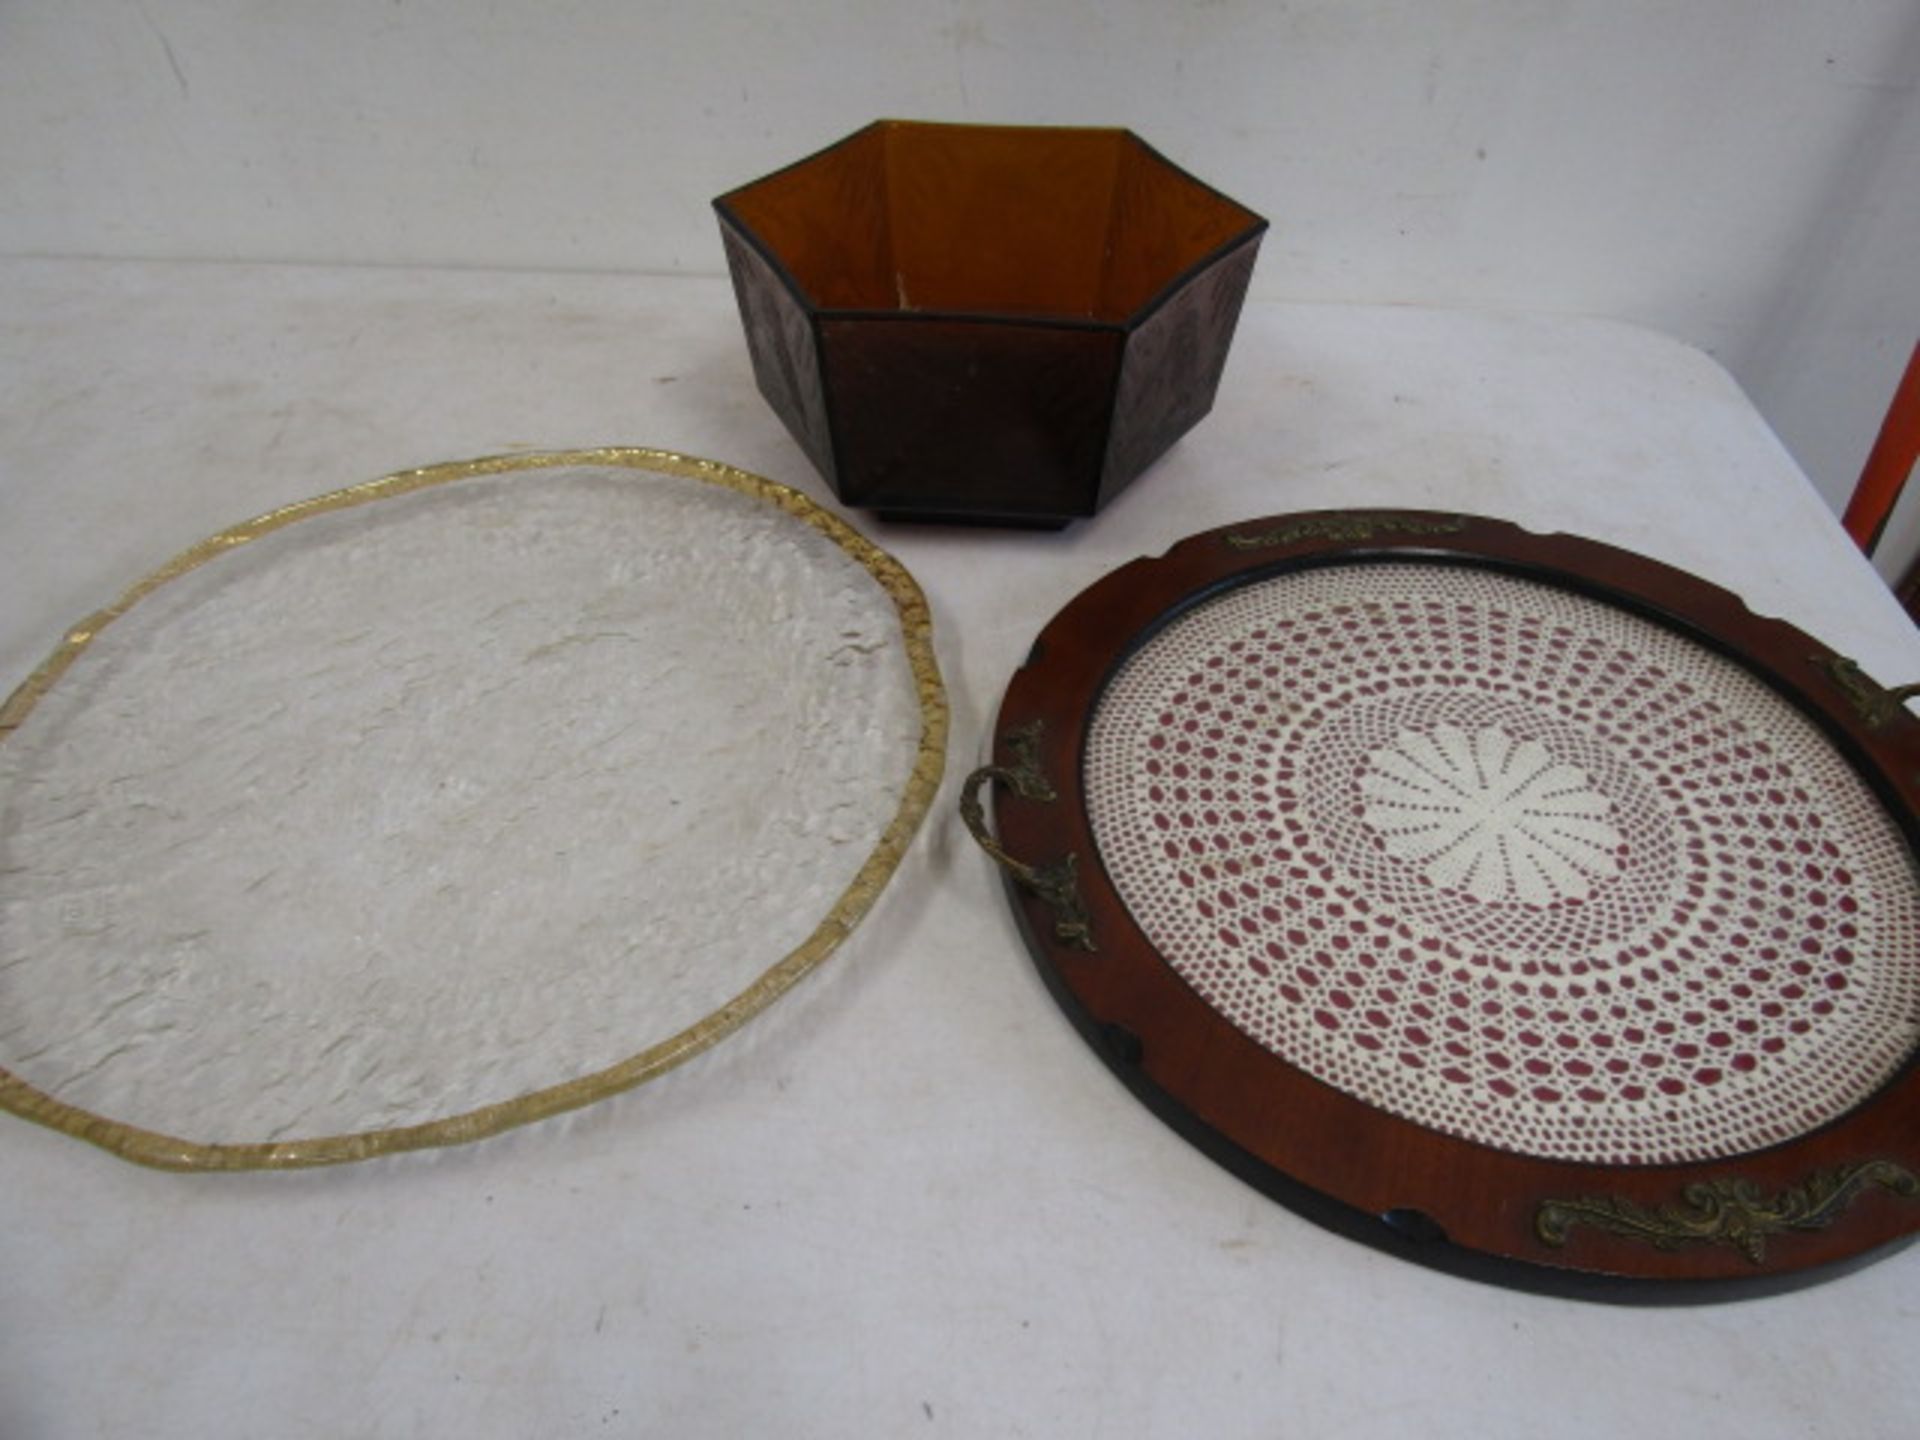 Kingfisher embossed glass bowl, lace doily tray and a glass dish with gilt rim